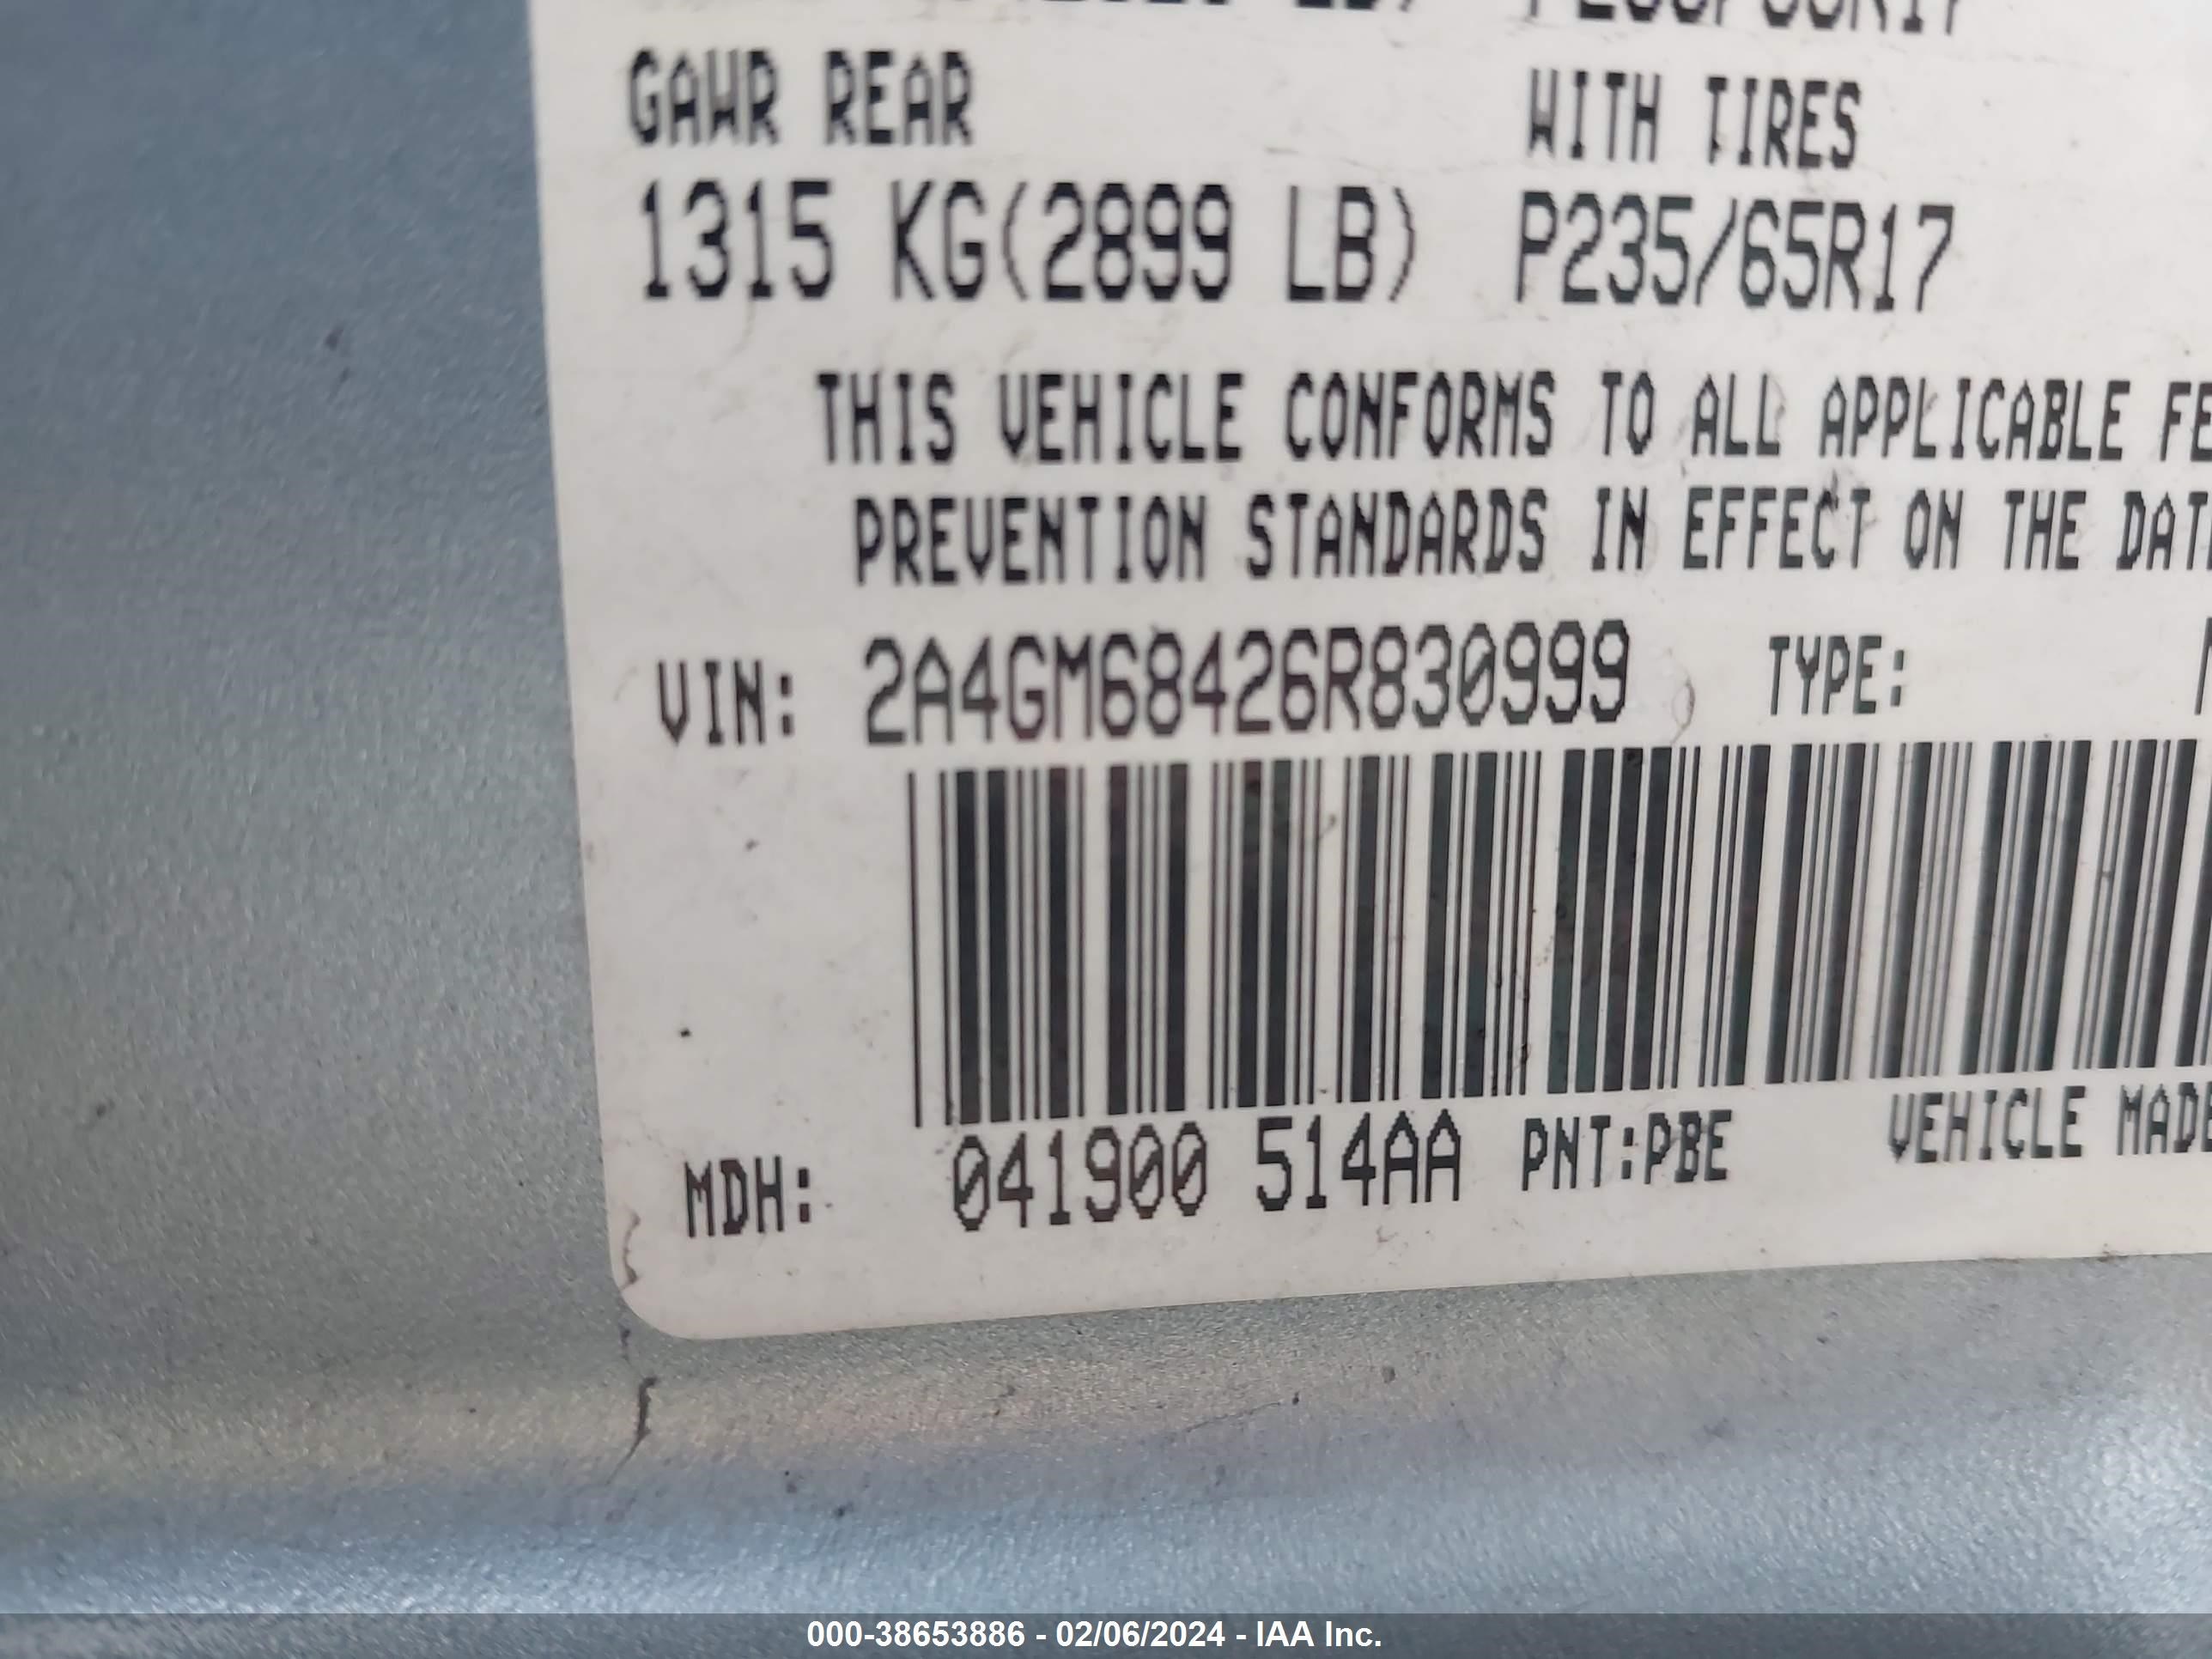 2A4GM68426R830999  - CHRYSLER PACIFICA  2006 IMG - 8